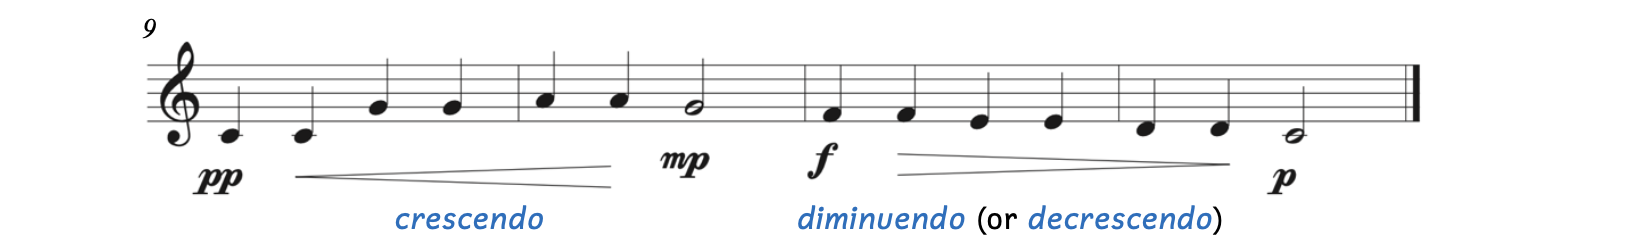 "Twinkle Twinkle Little Star" begins at measure 9 with gradual dynamics. The example begins pianissimo and crescendos to mezzopiano in the middle of measure 10. Measure 11 begins forte and diminuendos (or decrescendos) to piano in the middle of measure 12.